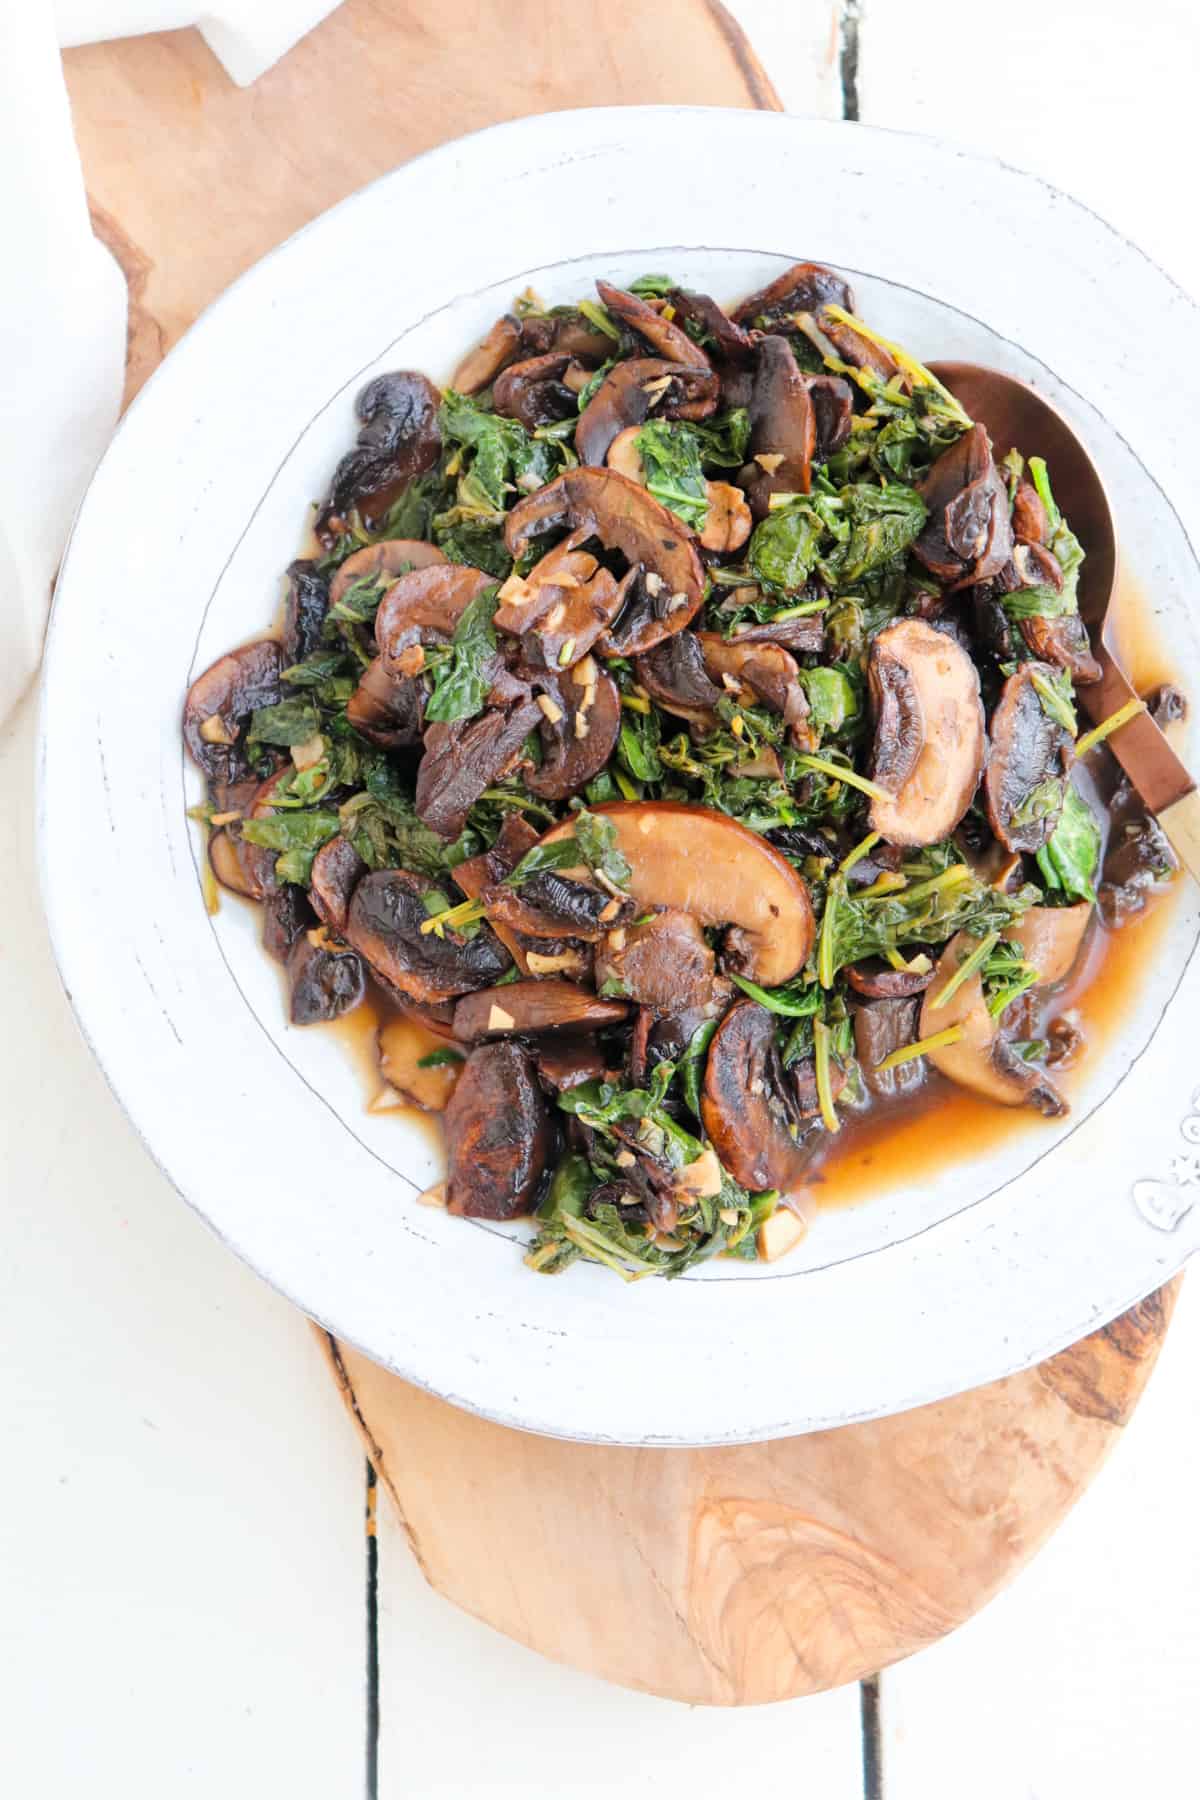 finished kale and mushroom dish on a white plate.